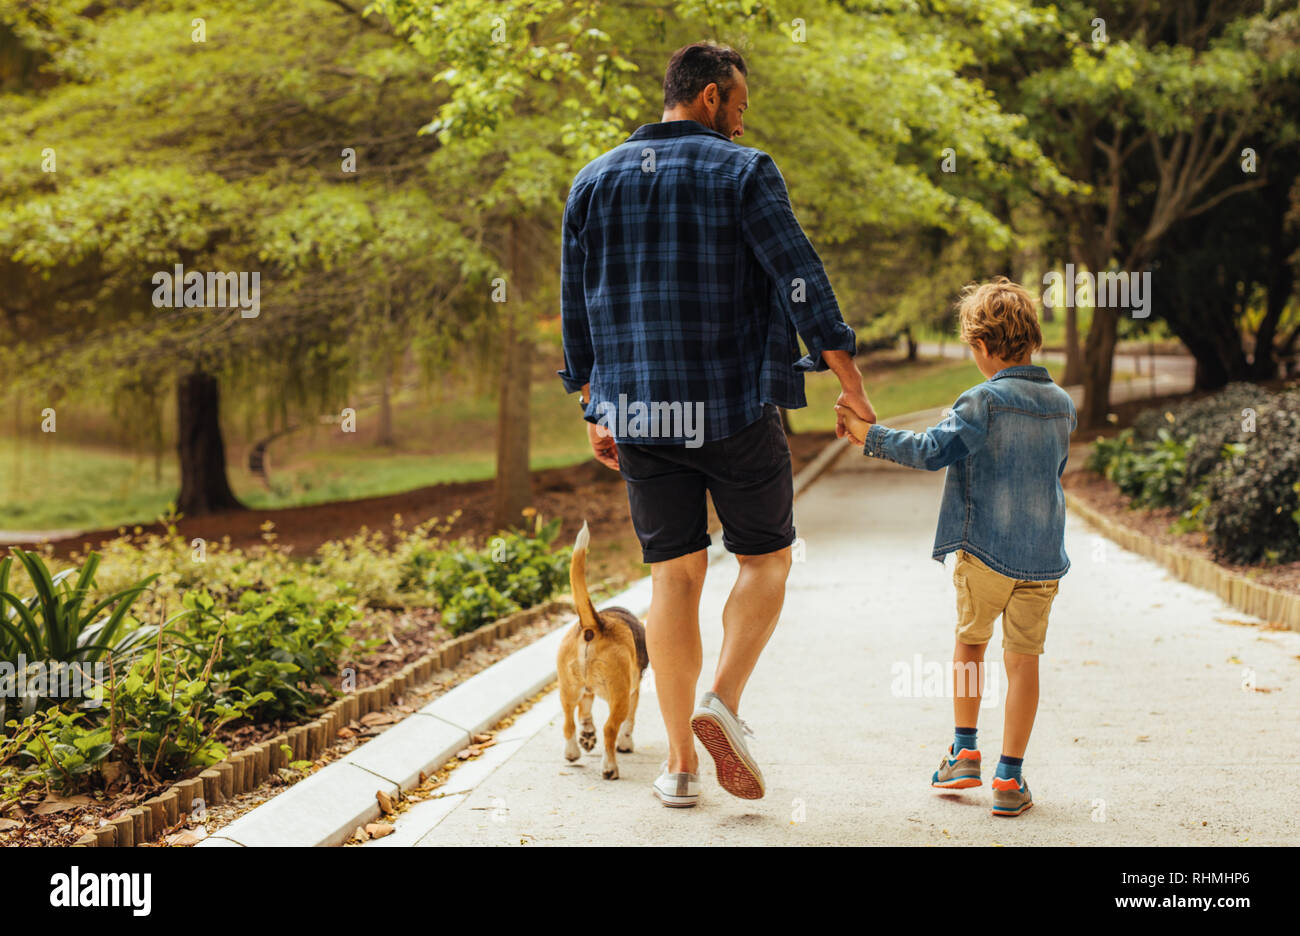 Rear view of father and son with dog walking in a park. Man holding hand on his little boy walking and talking outdoors in park. Stock Photo